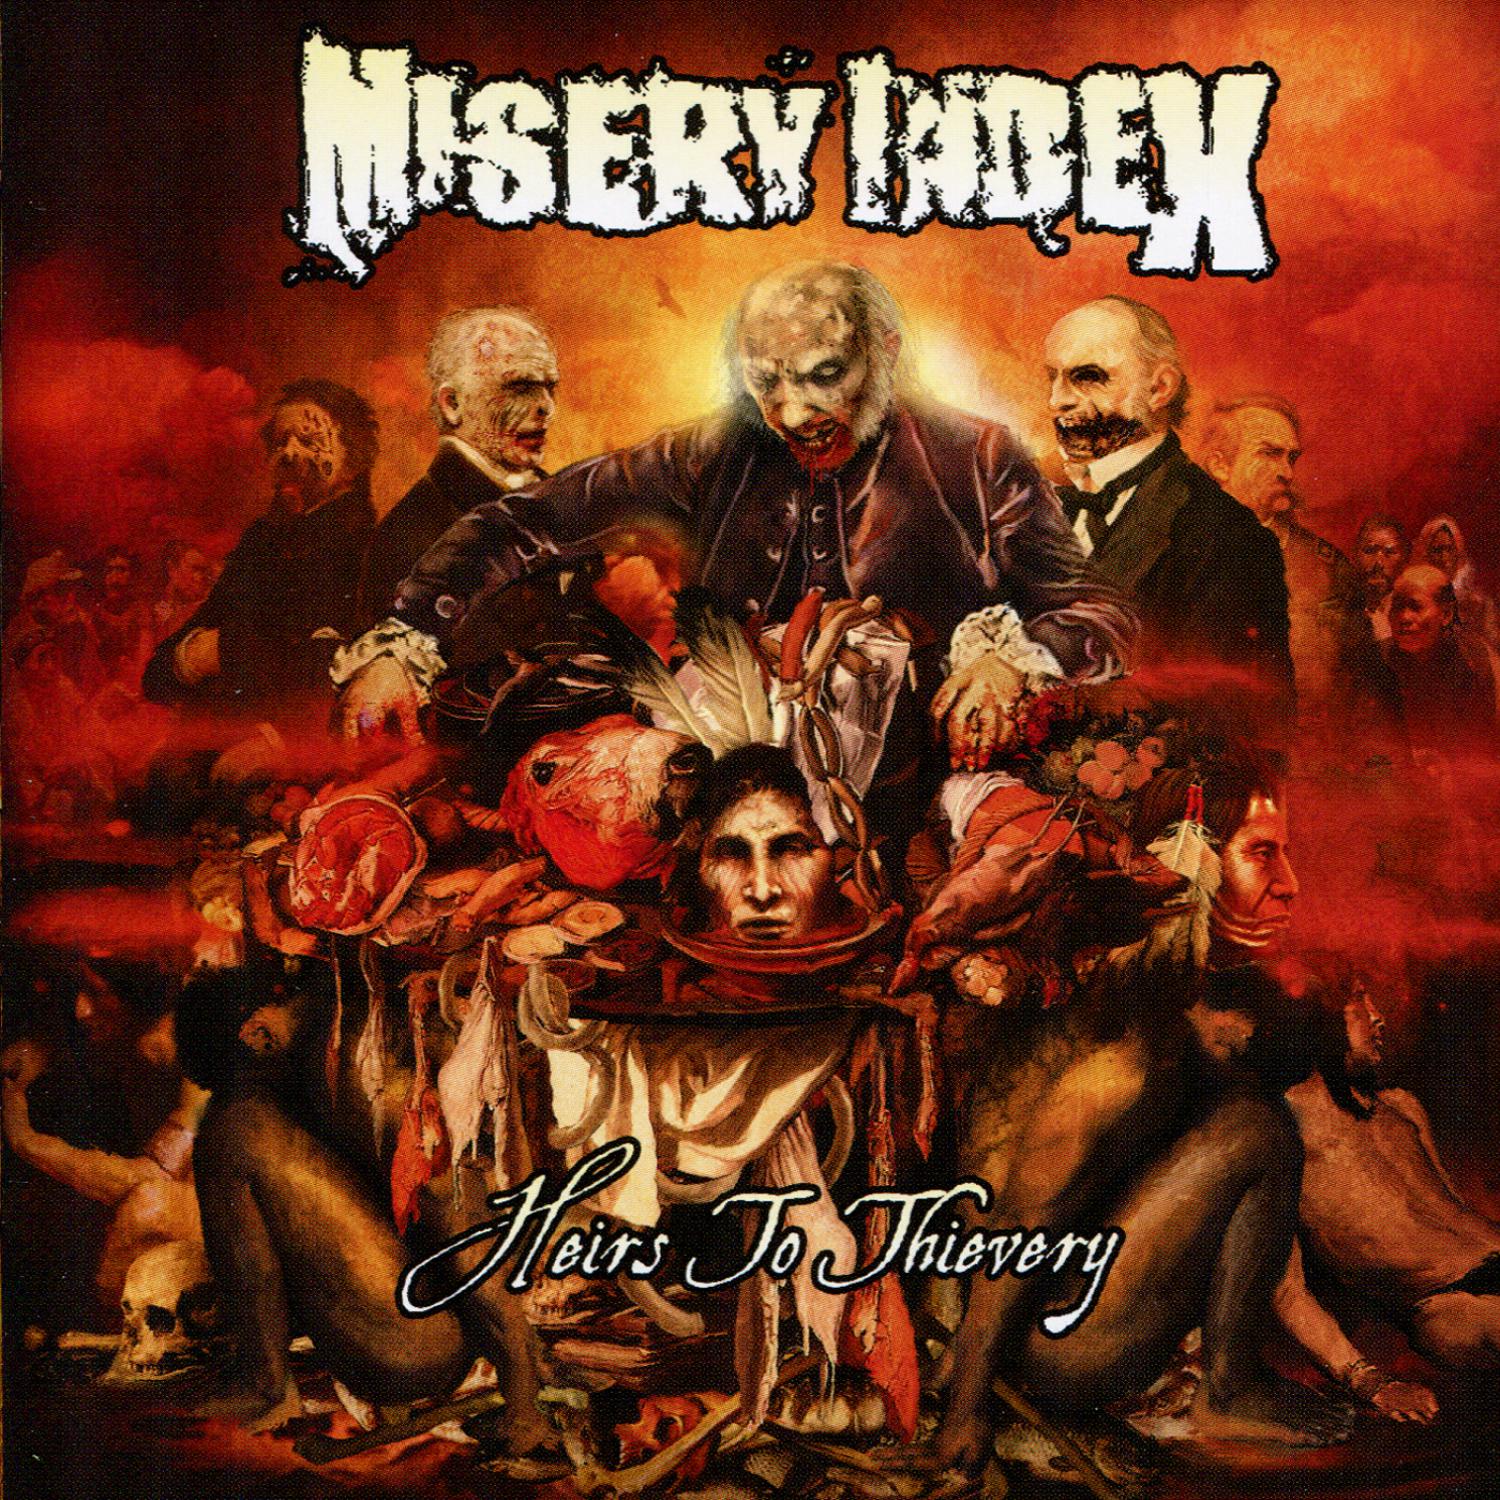 Misery Index - The Spectator